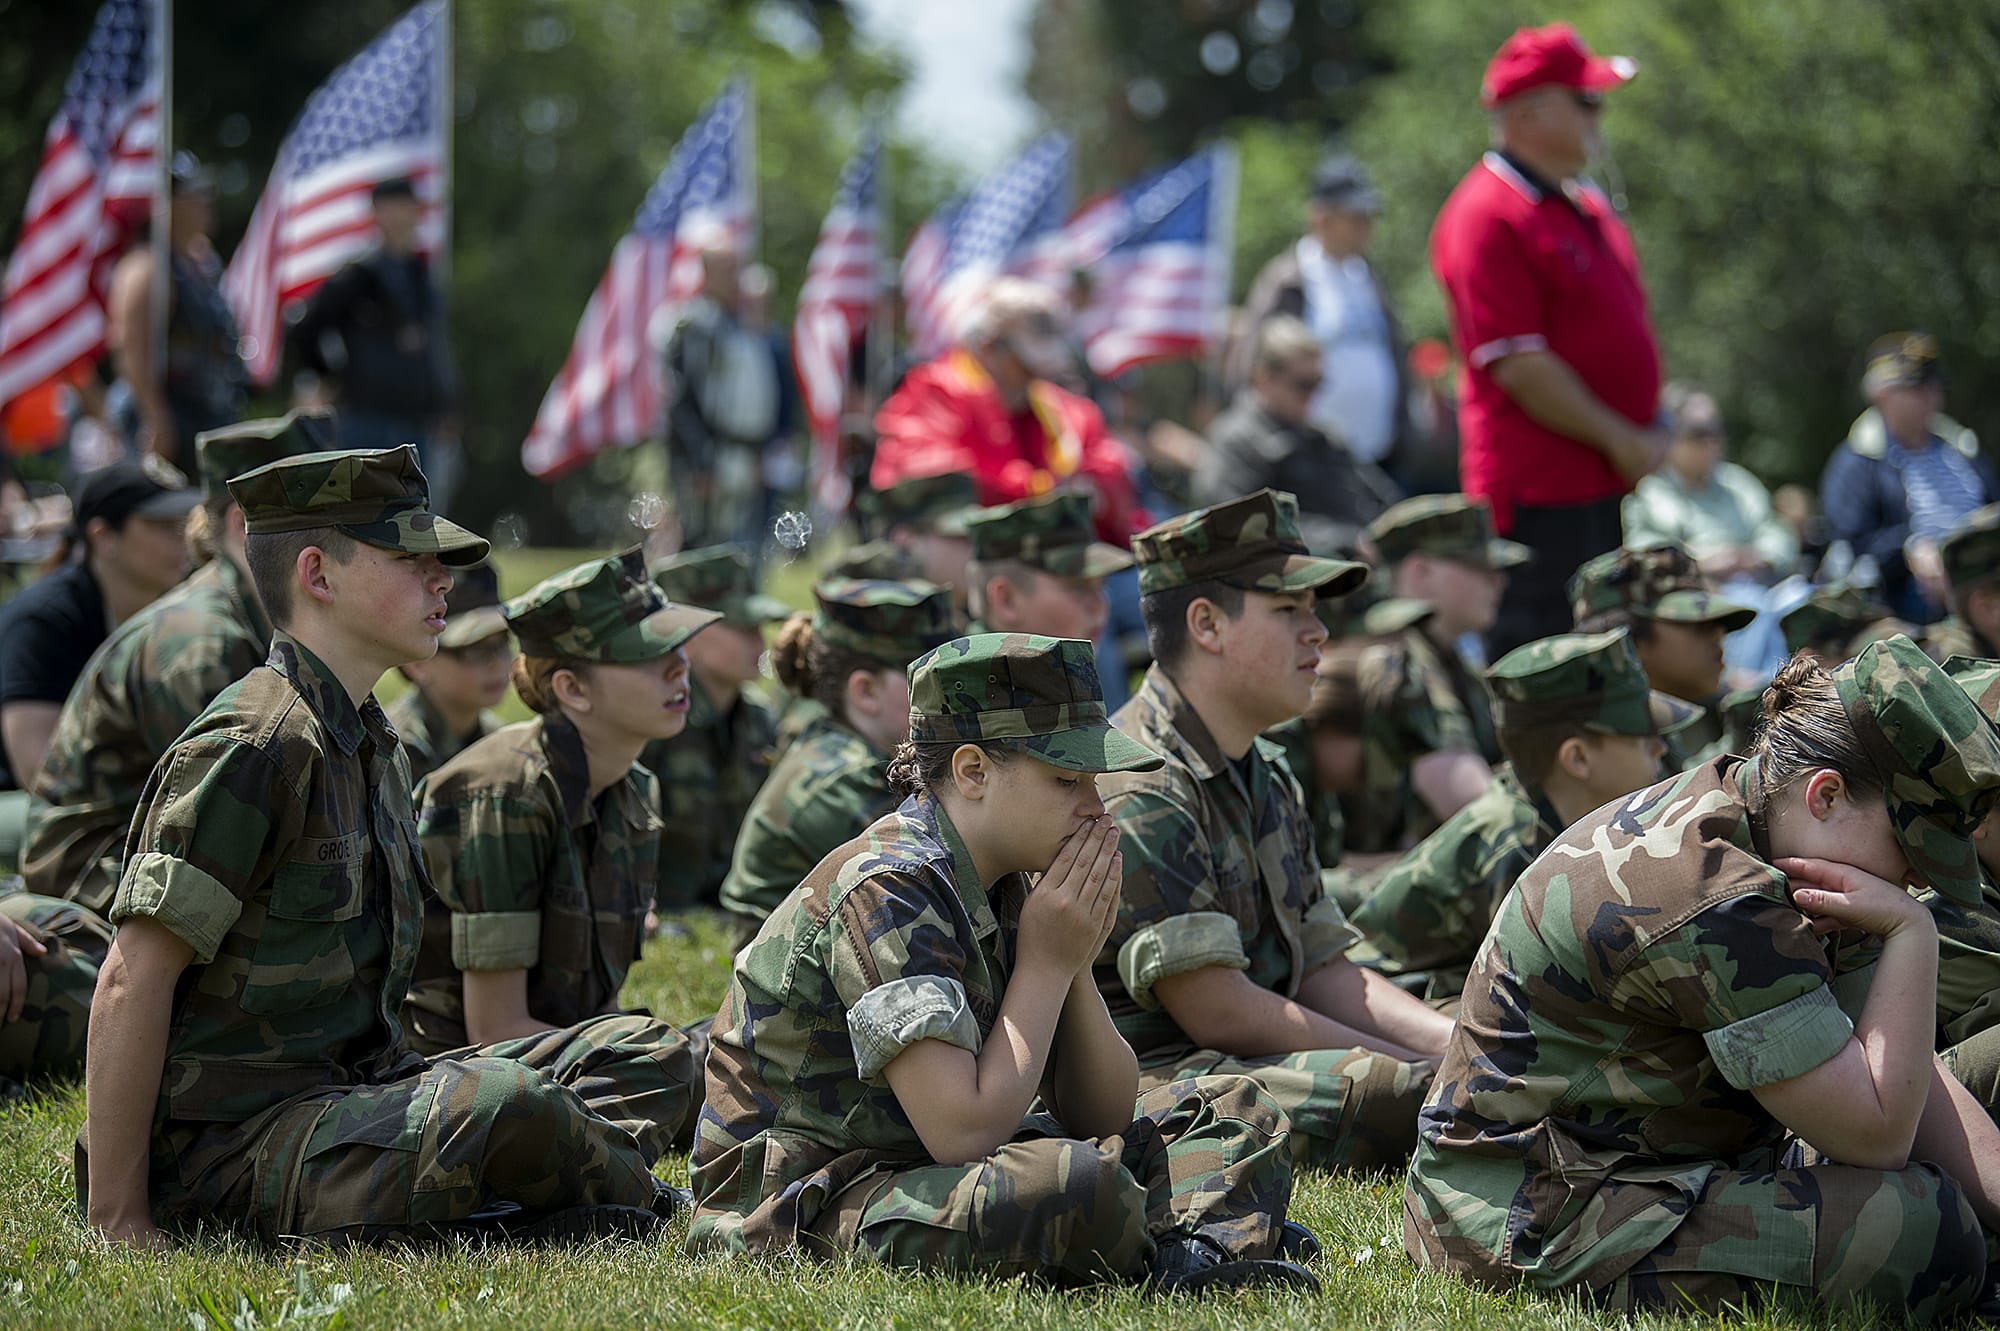 Jillian Massey, 12, of the Marine Cadets pauses for a quiet moment during the annual Memorial Day Observance at Fort Vancouver National Historic Site on Monday morning, May 28, 2018.